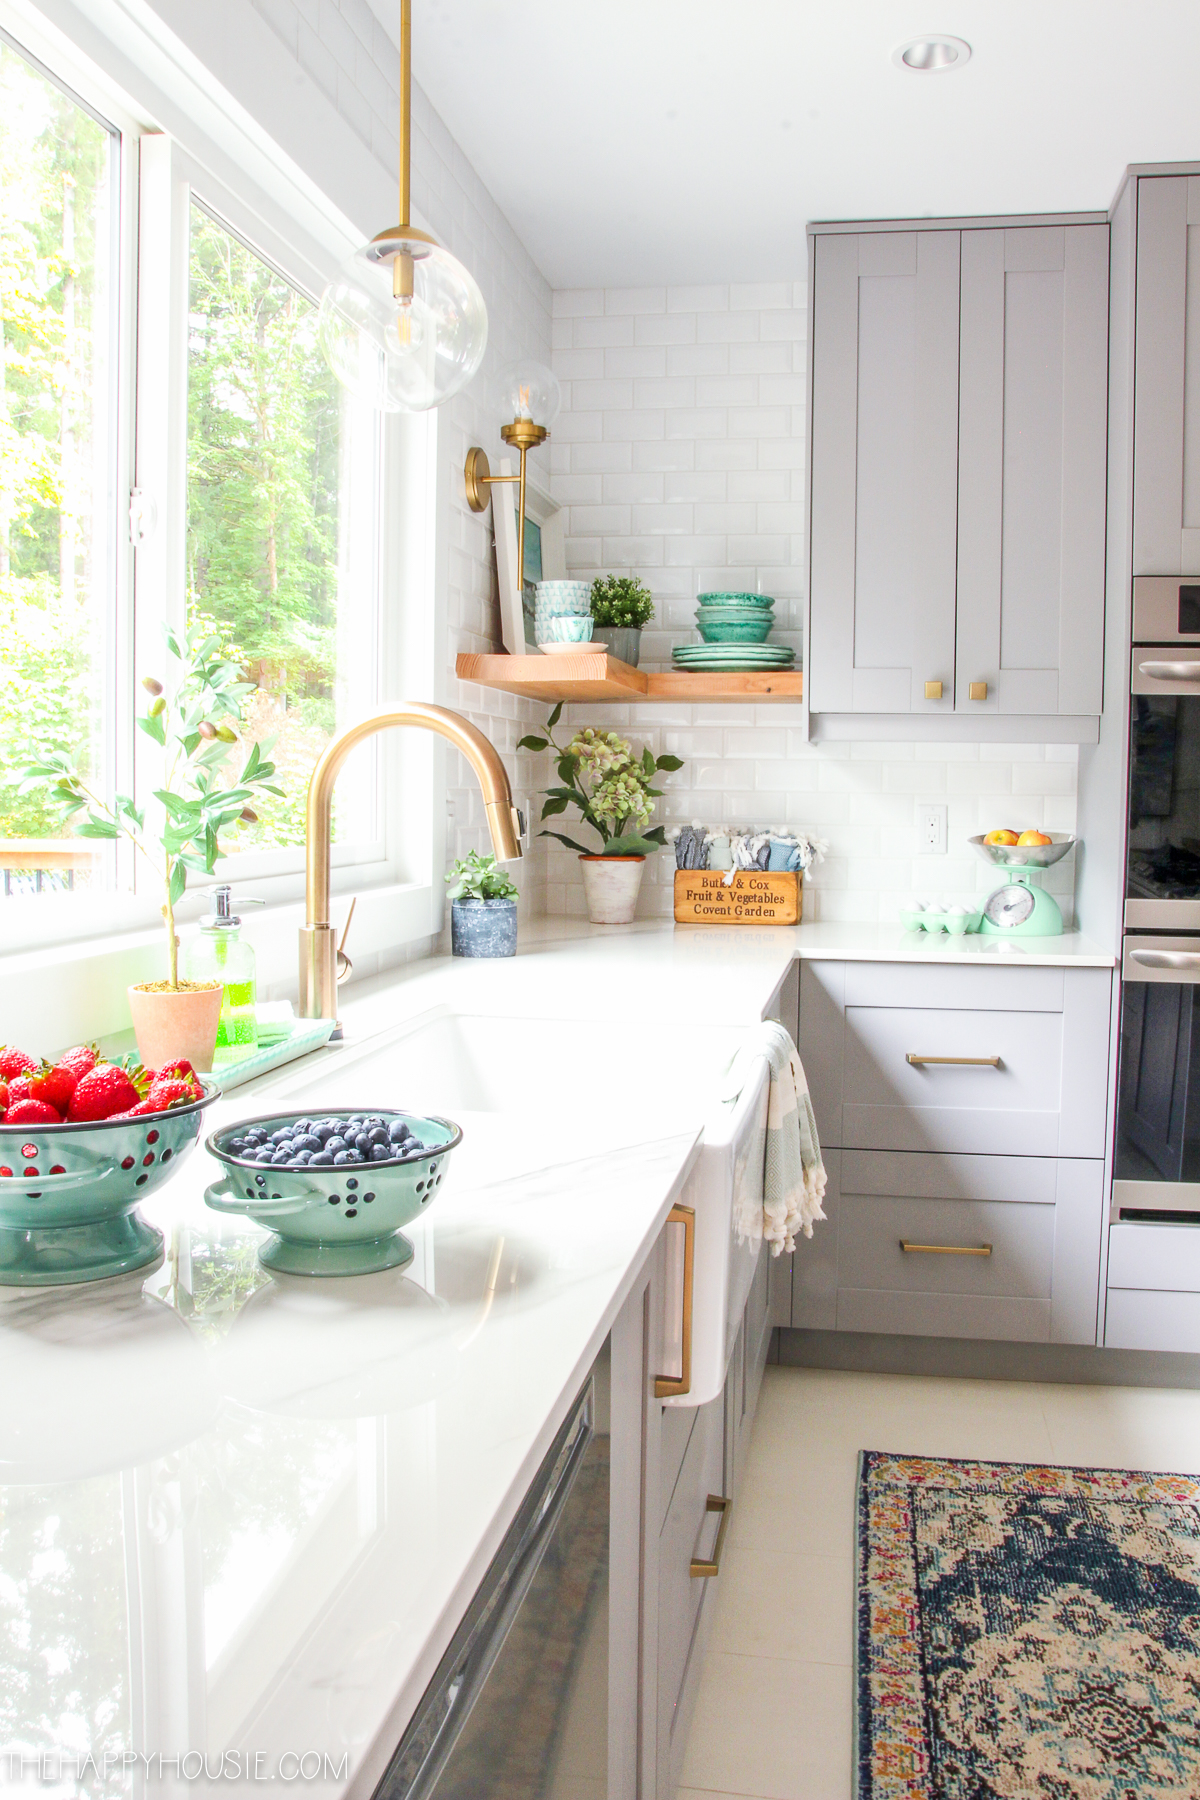 The white counters in the kitchen.